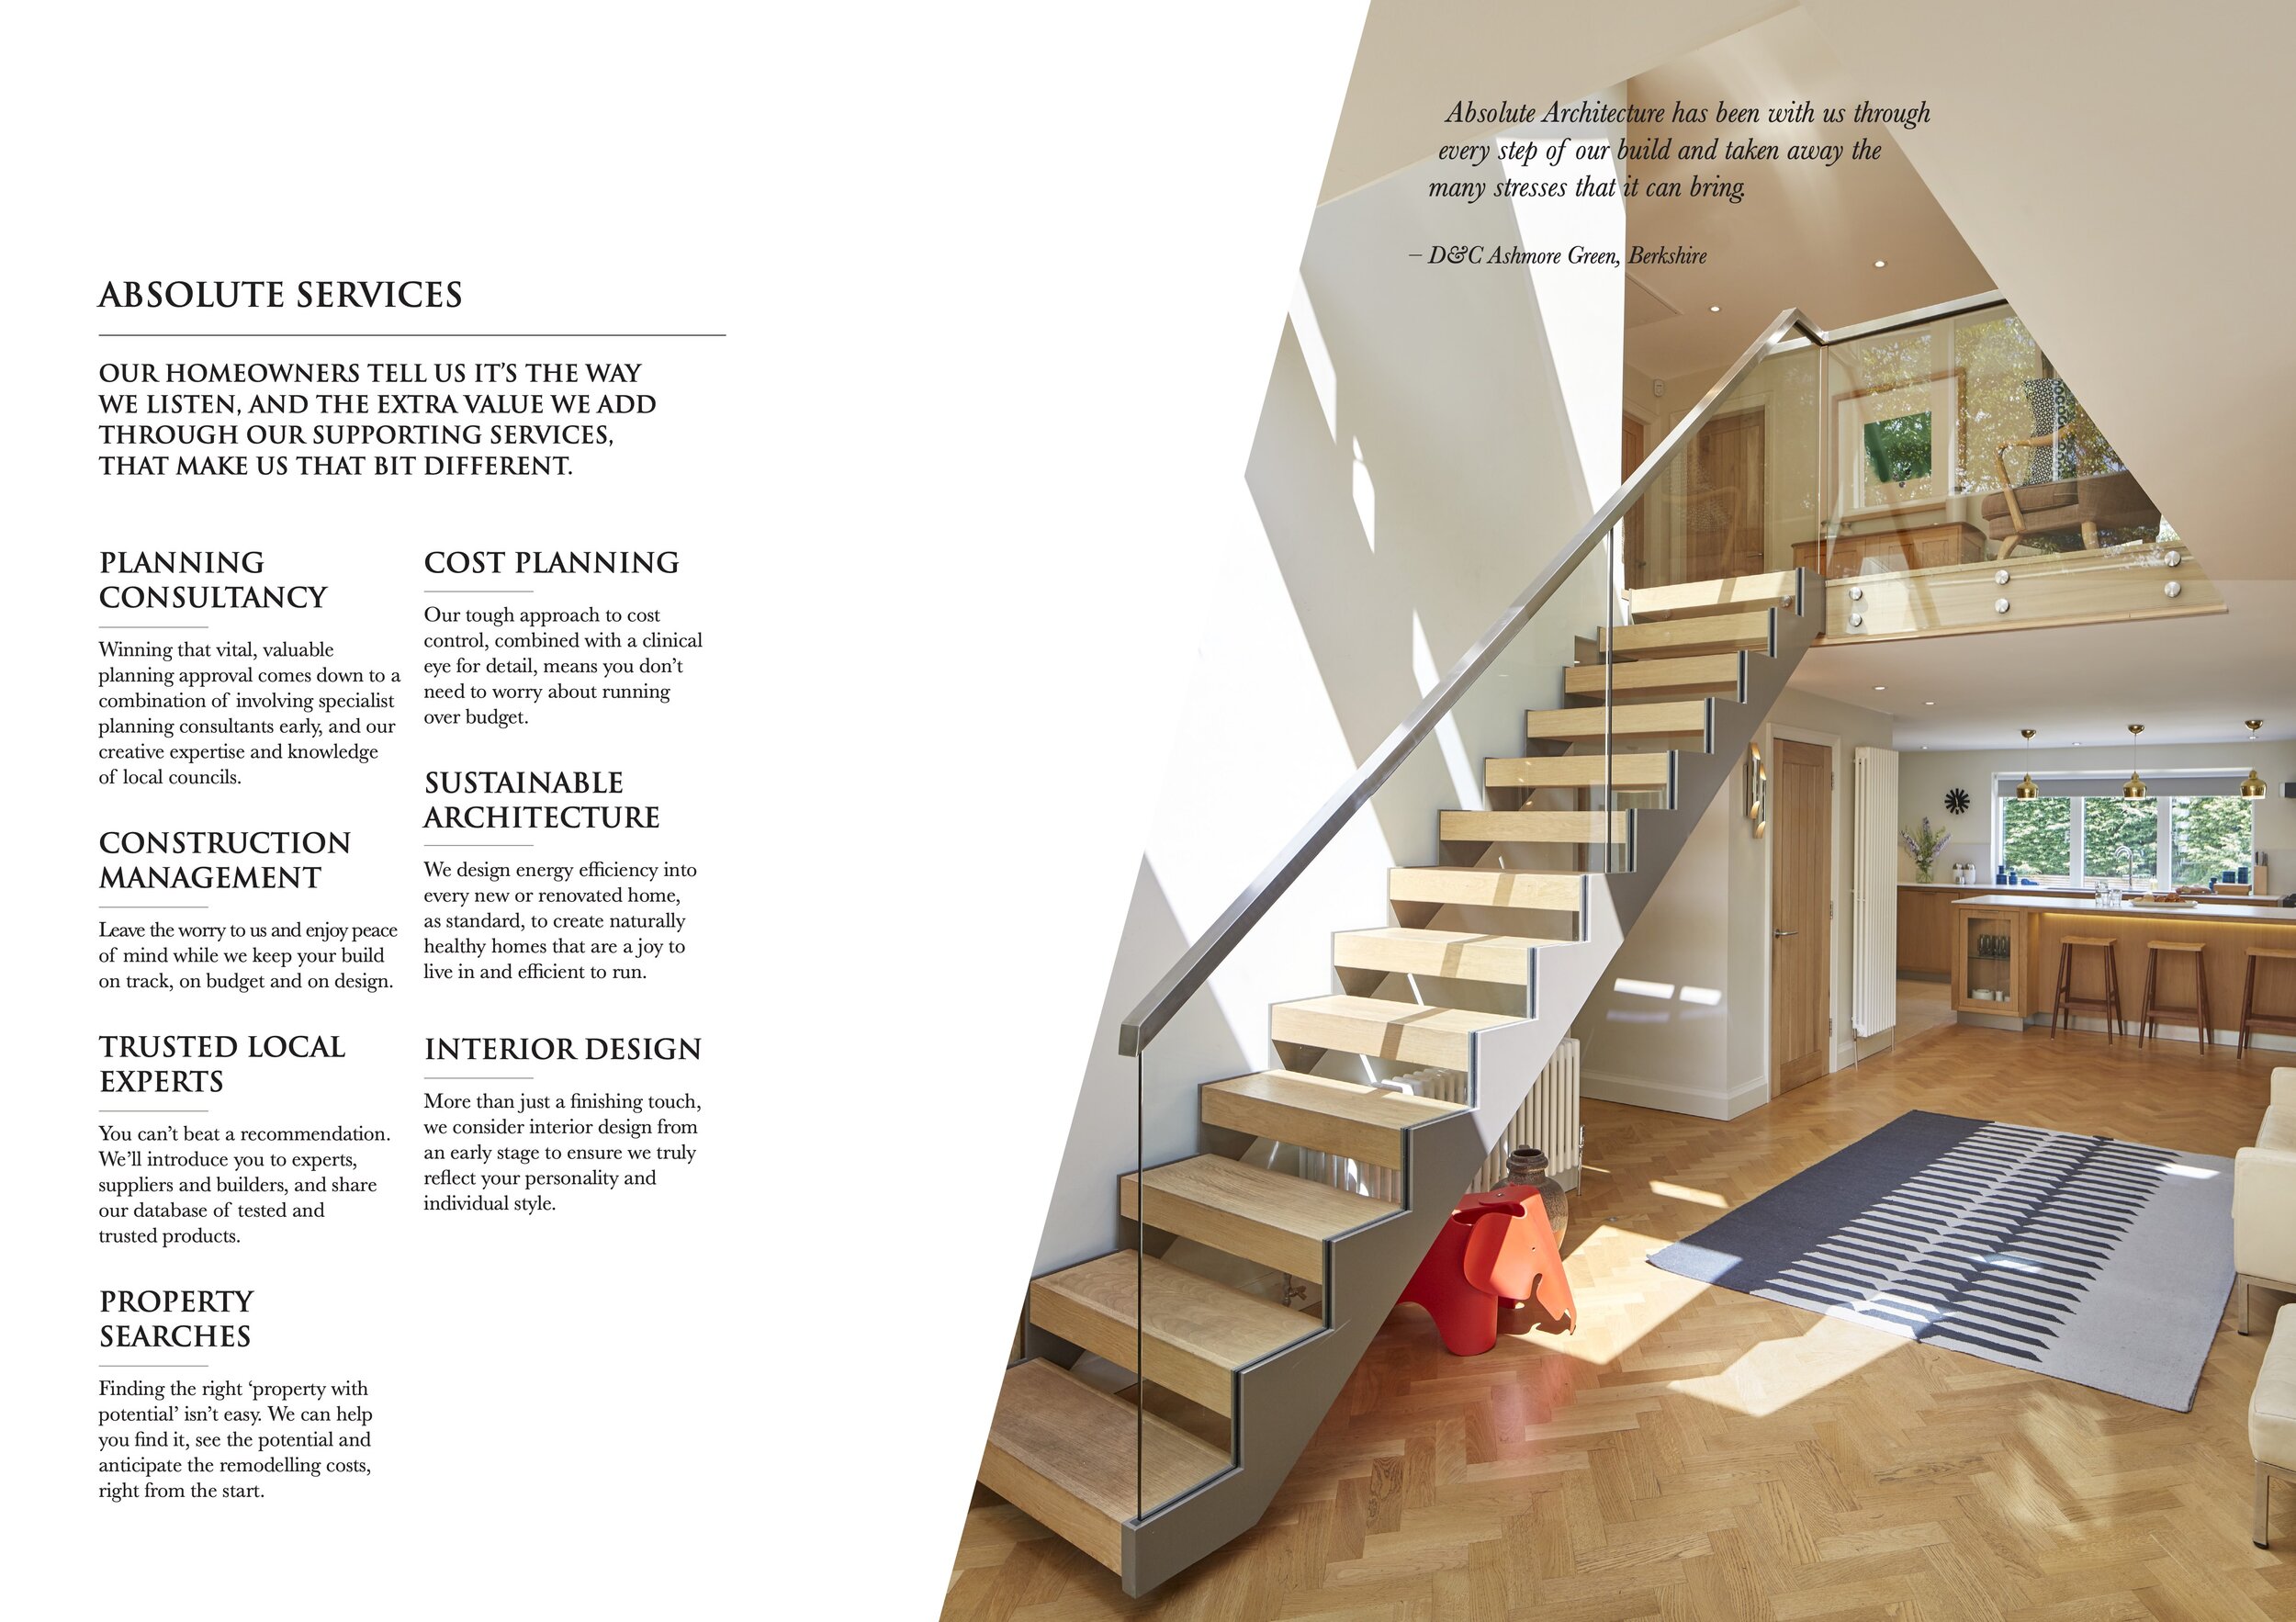 Absolute-Architecture_A4_Brochure_p9-services-power-of-words-copywriter.jpg